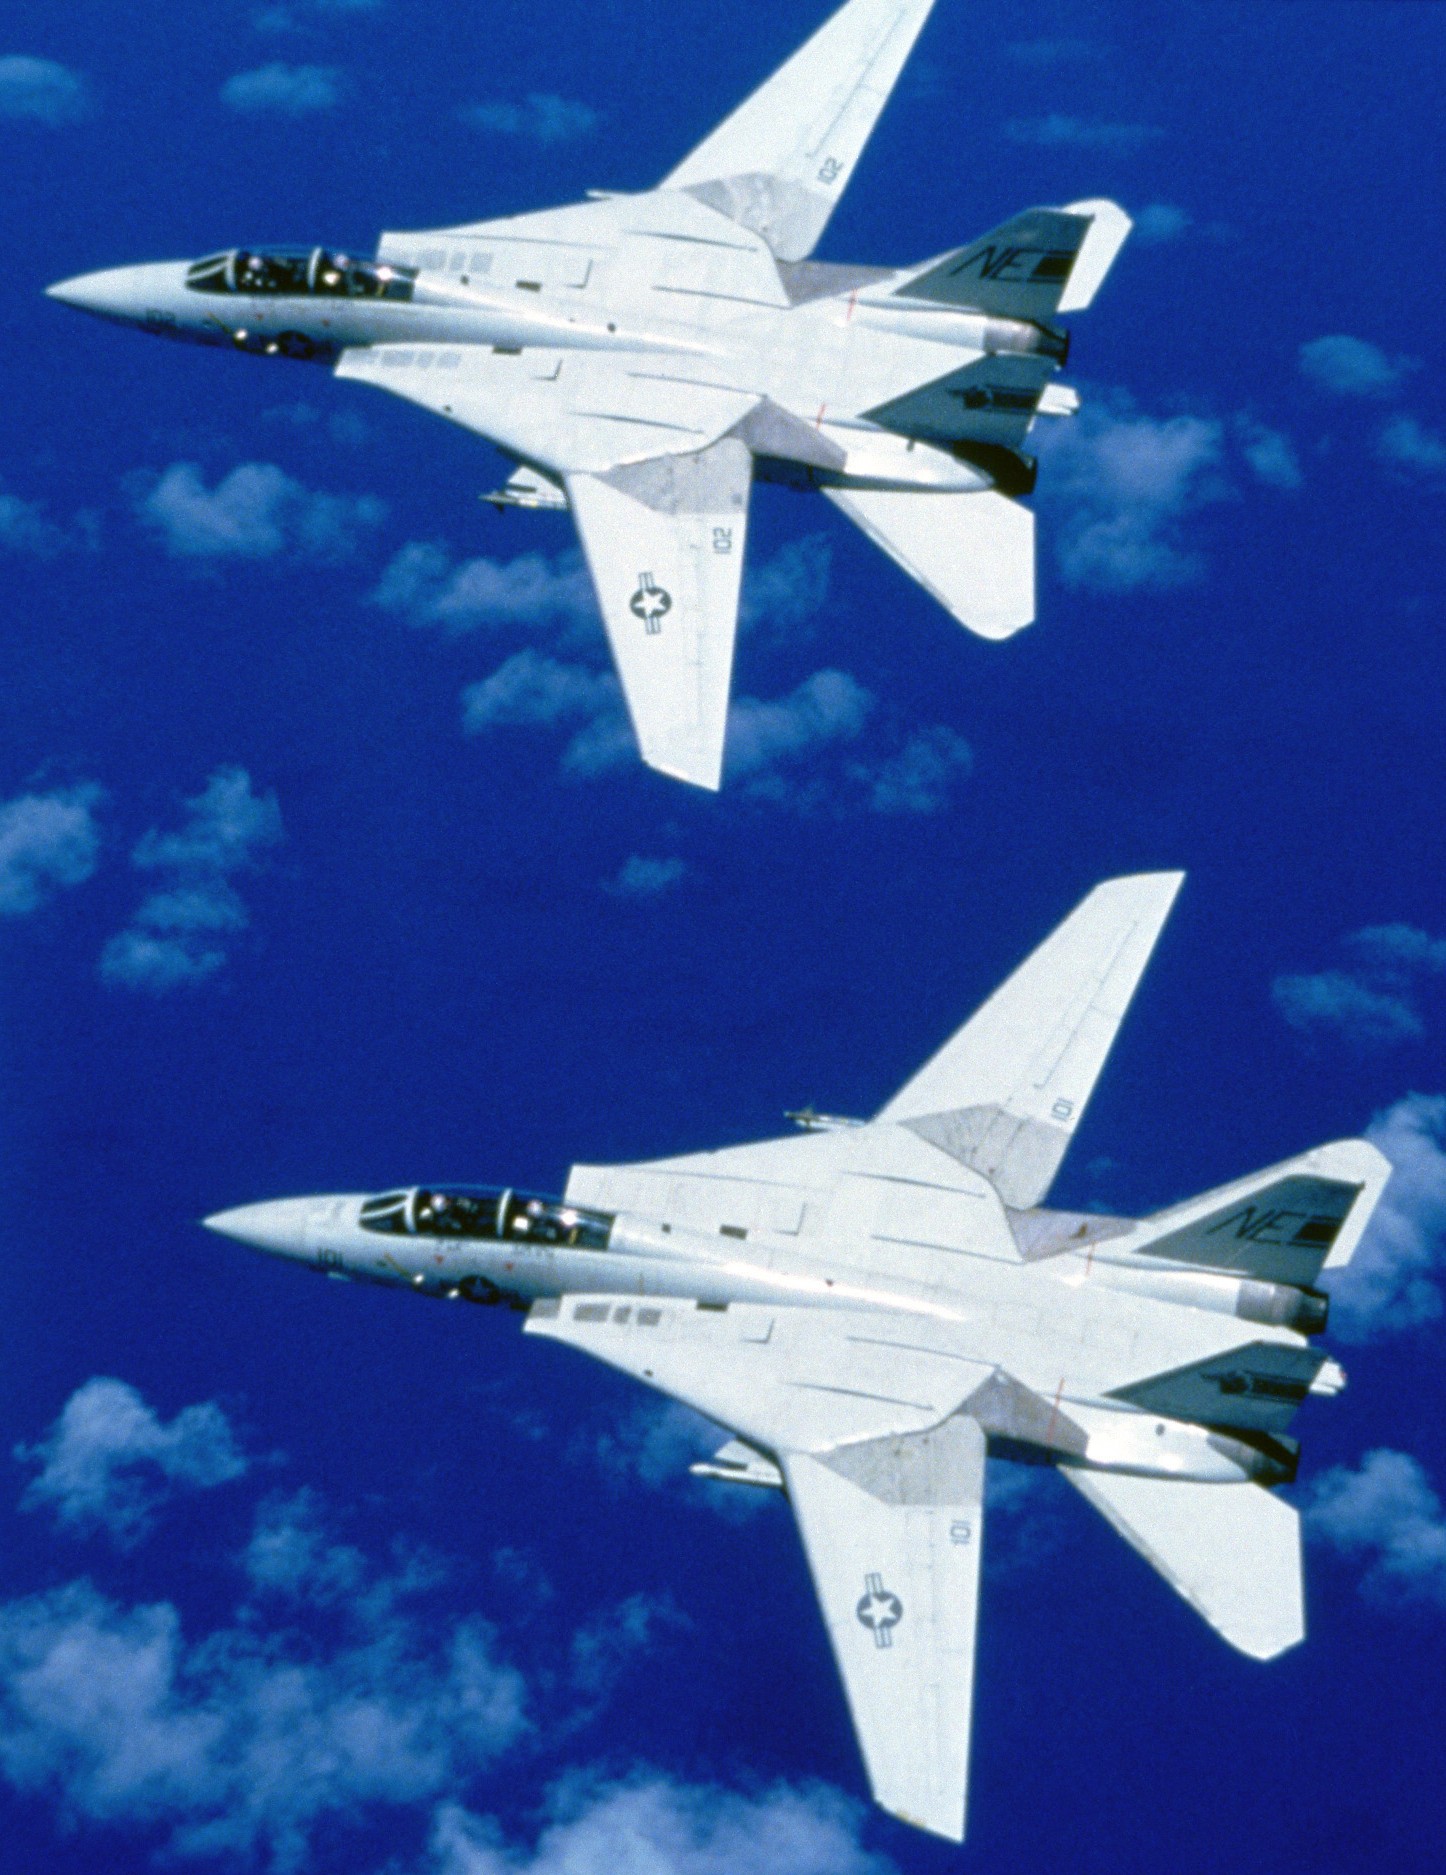 vf-1 wolfpack fighter squadron f-14a tomcat carrier air wing cvw-2 uss ranger cv-61 28